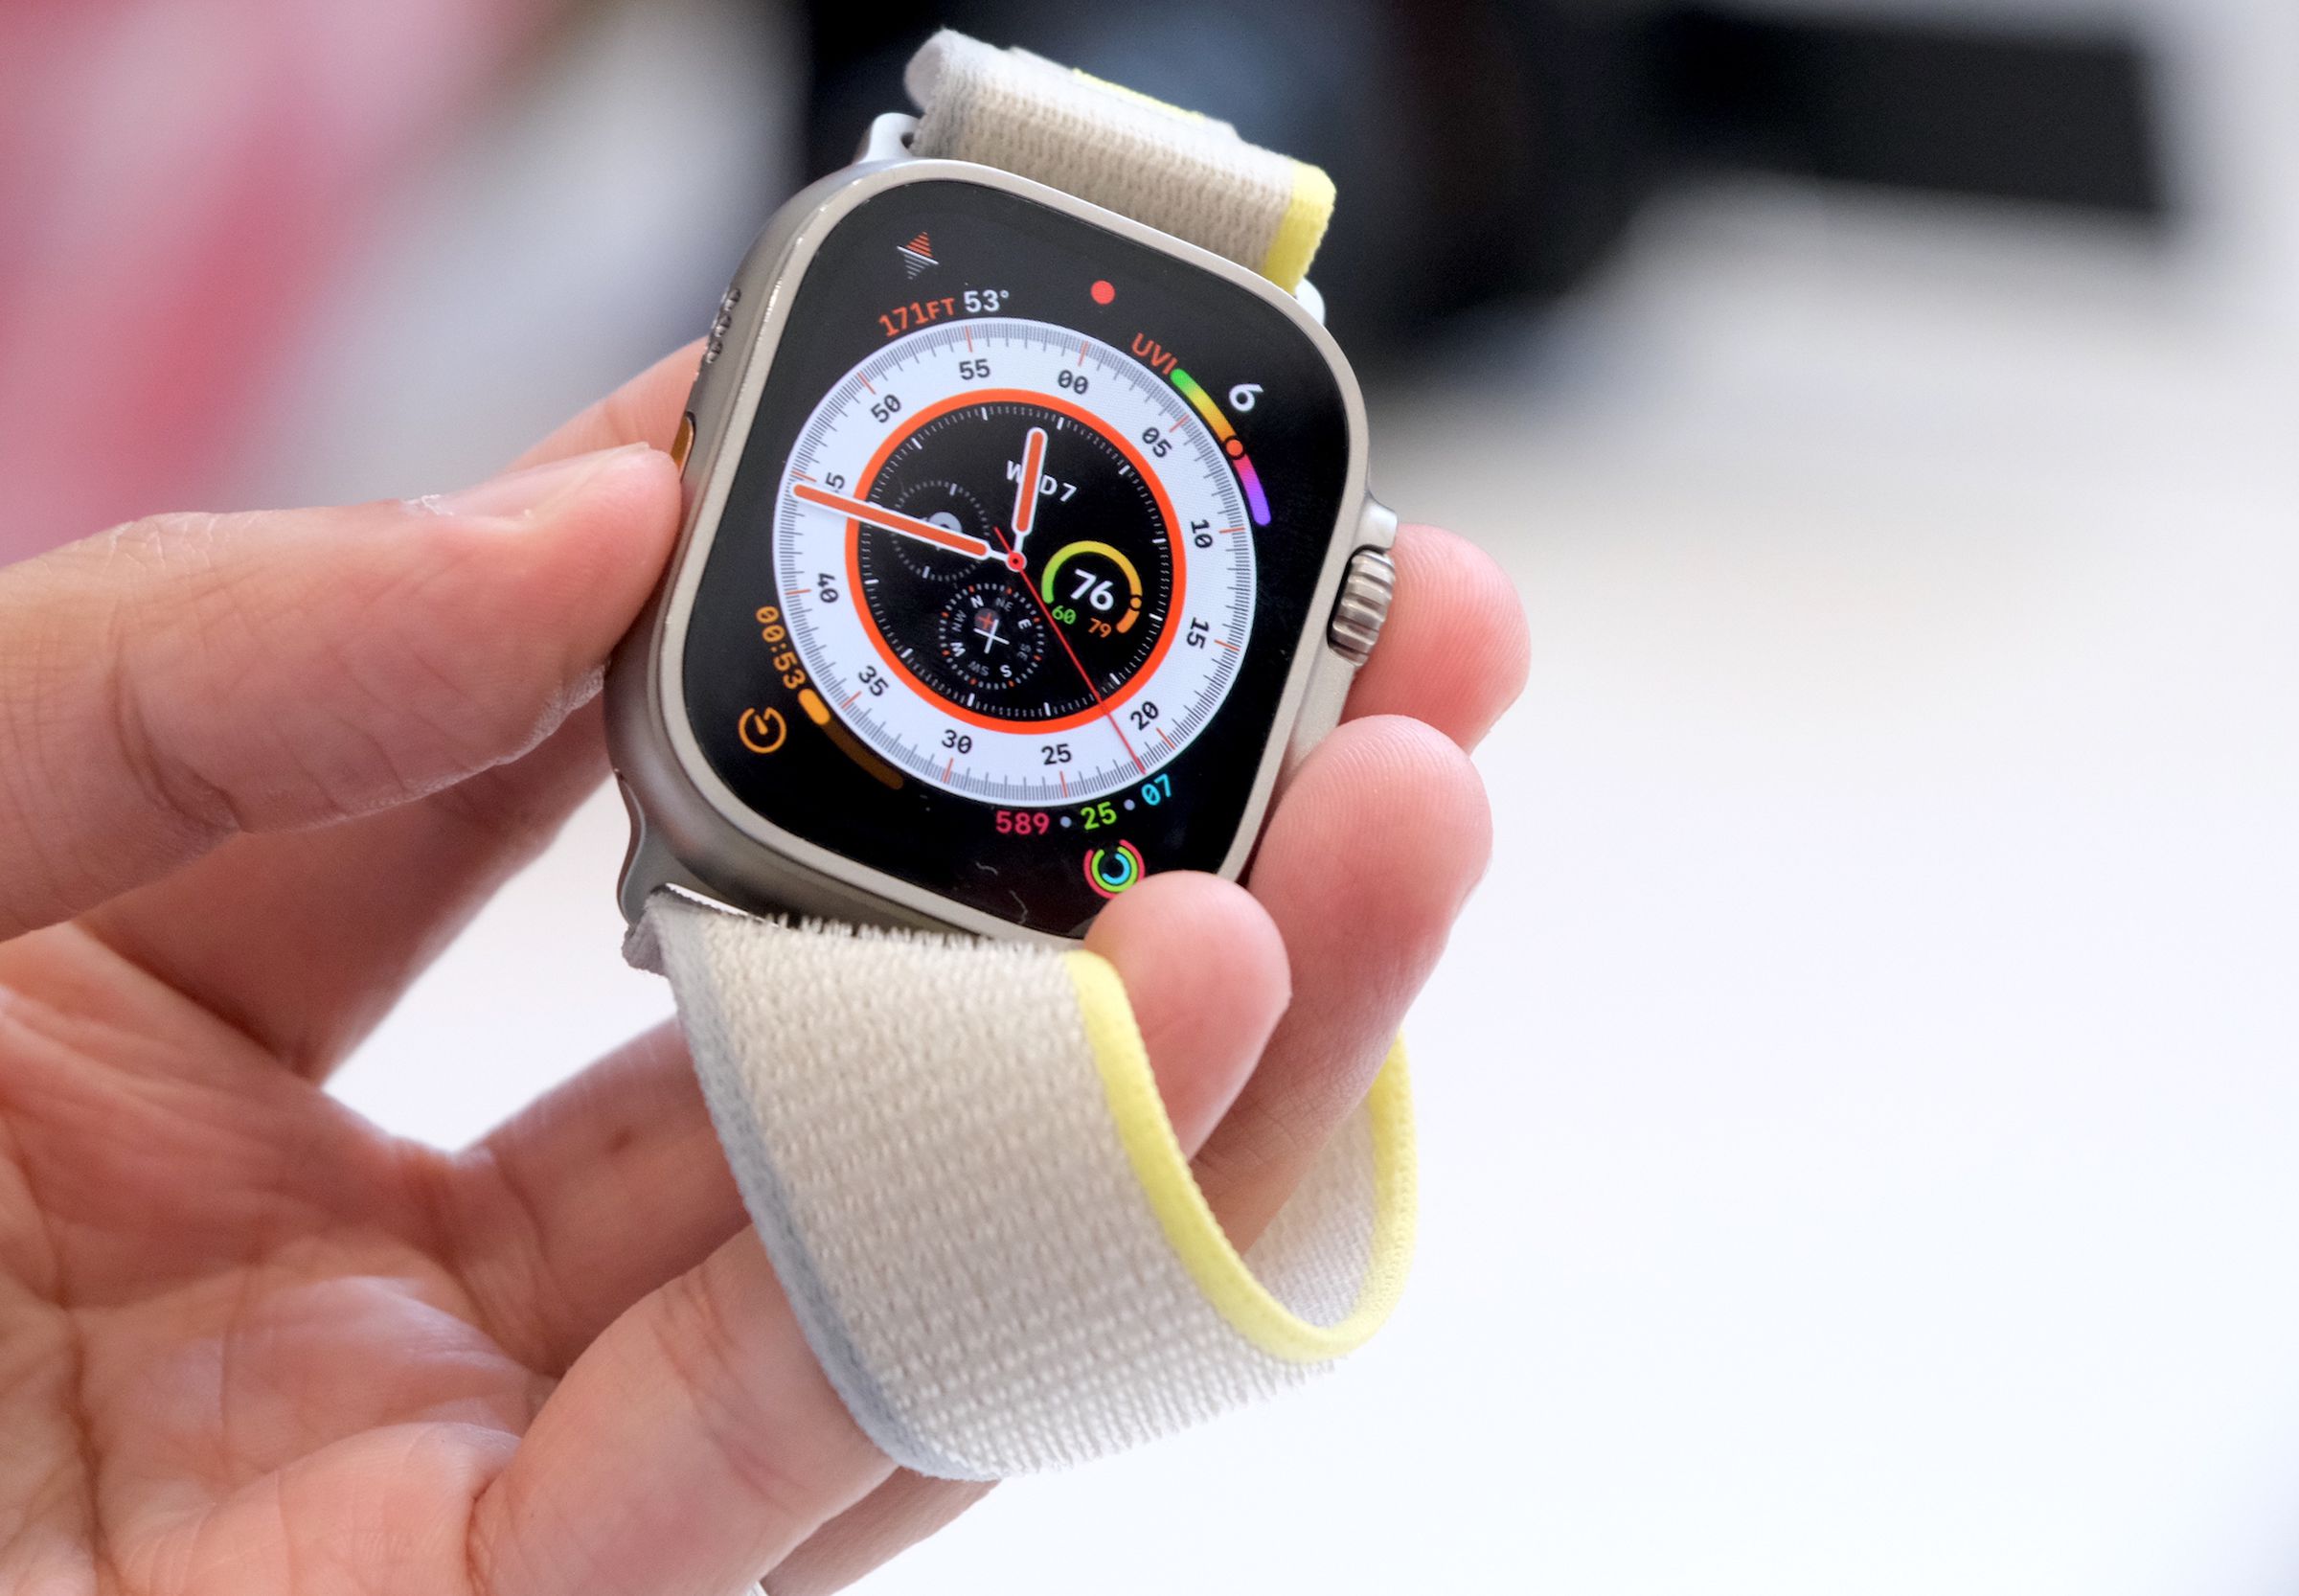 The Apple Watch Ultra features a large, flat display with a protective bezel.